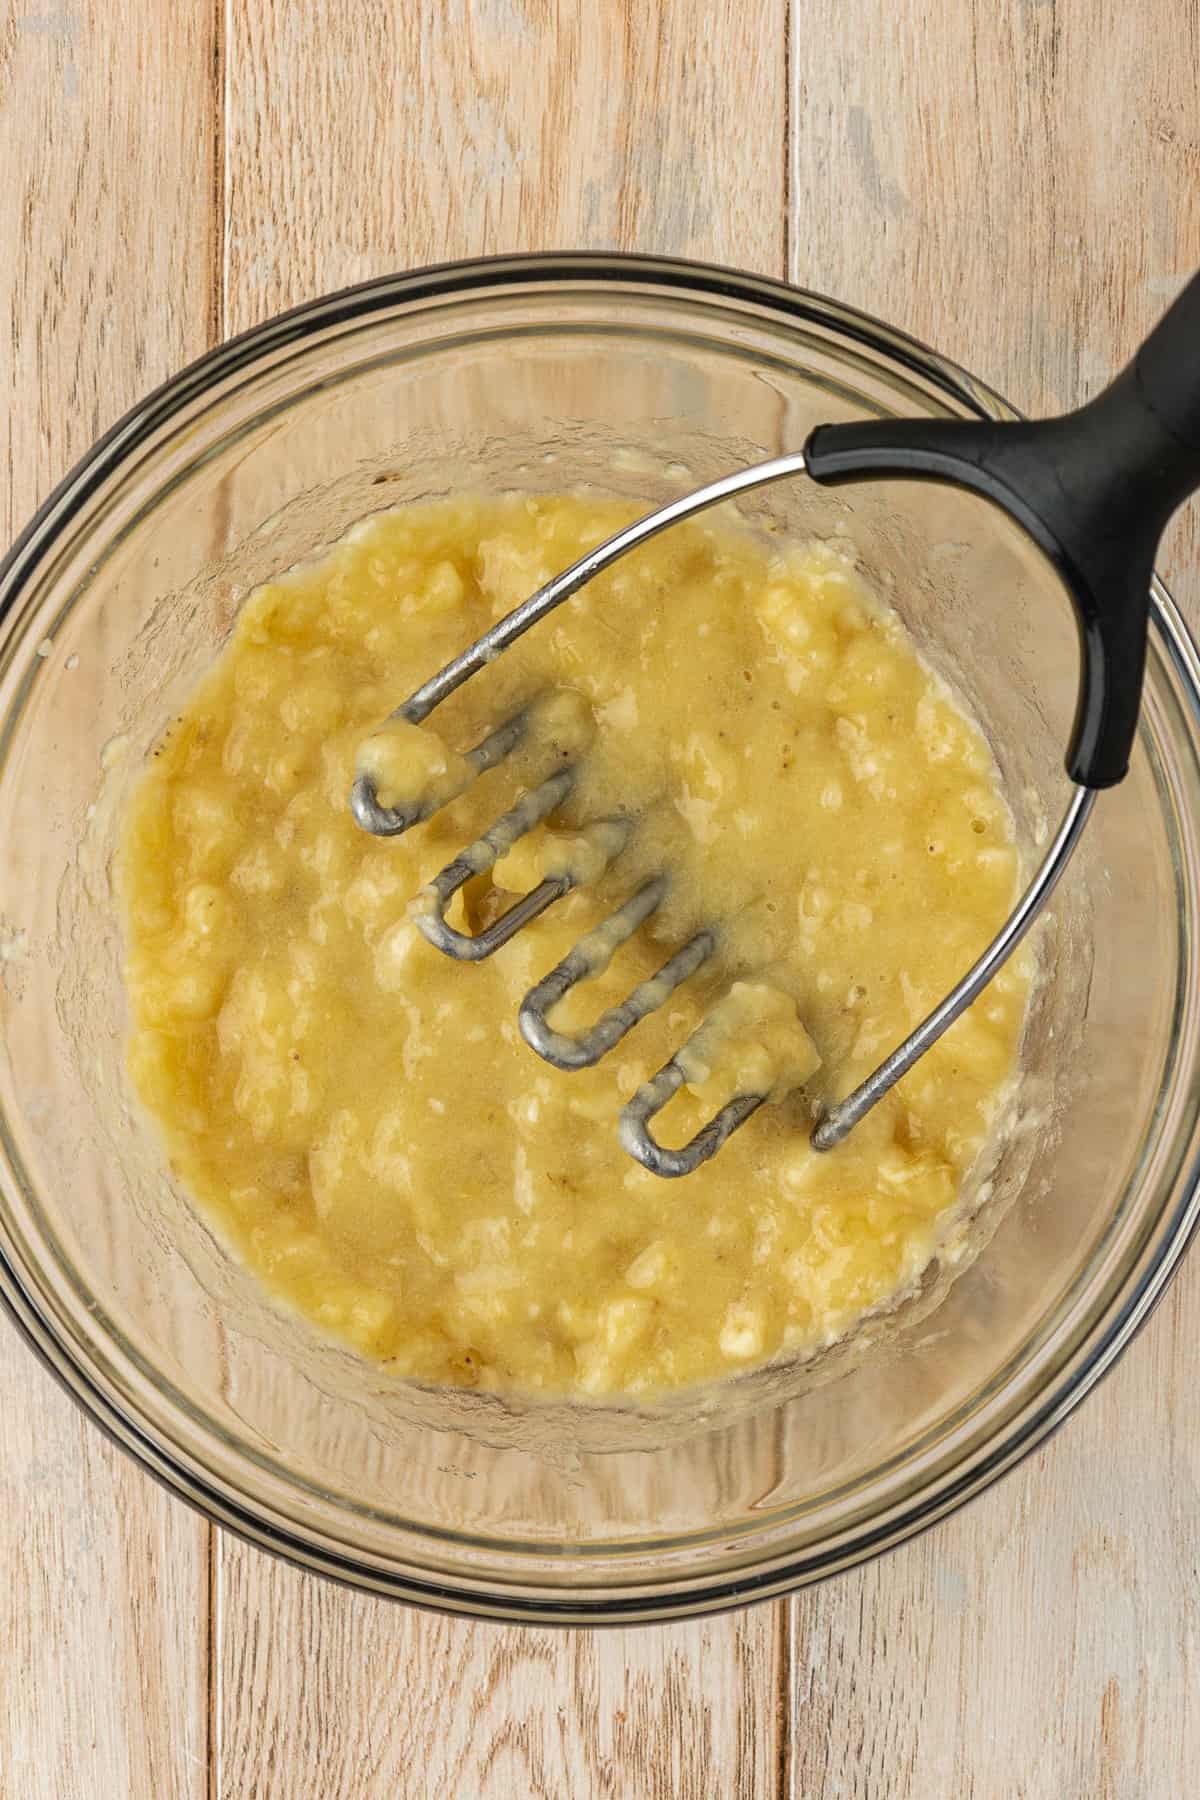 a glass bowl full of mashed banana with a masher leaning in the bowl, sitting on a wooden surface